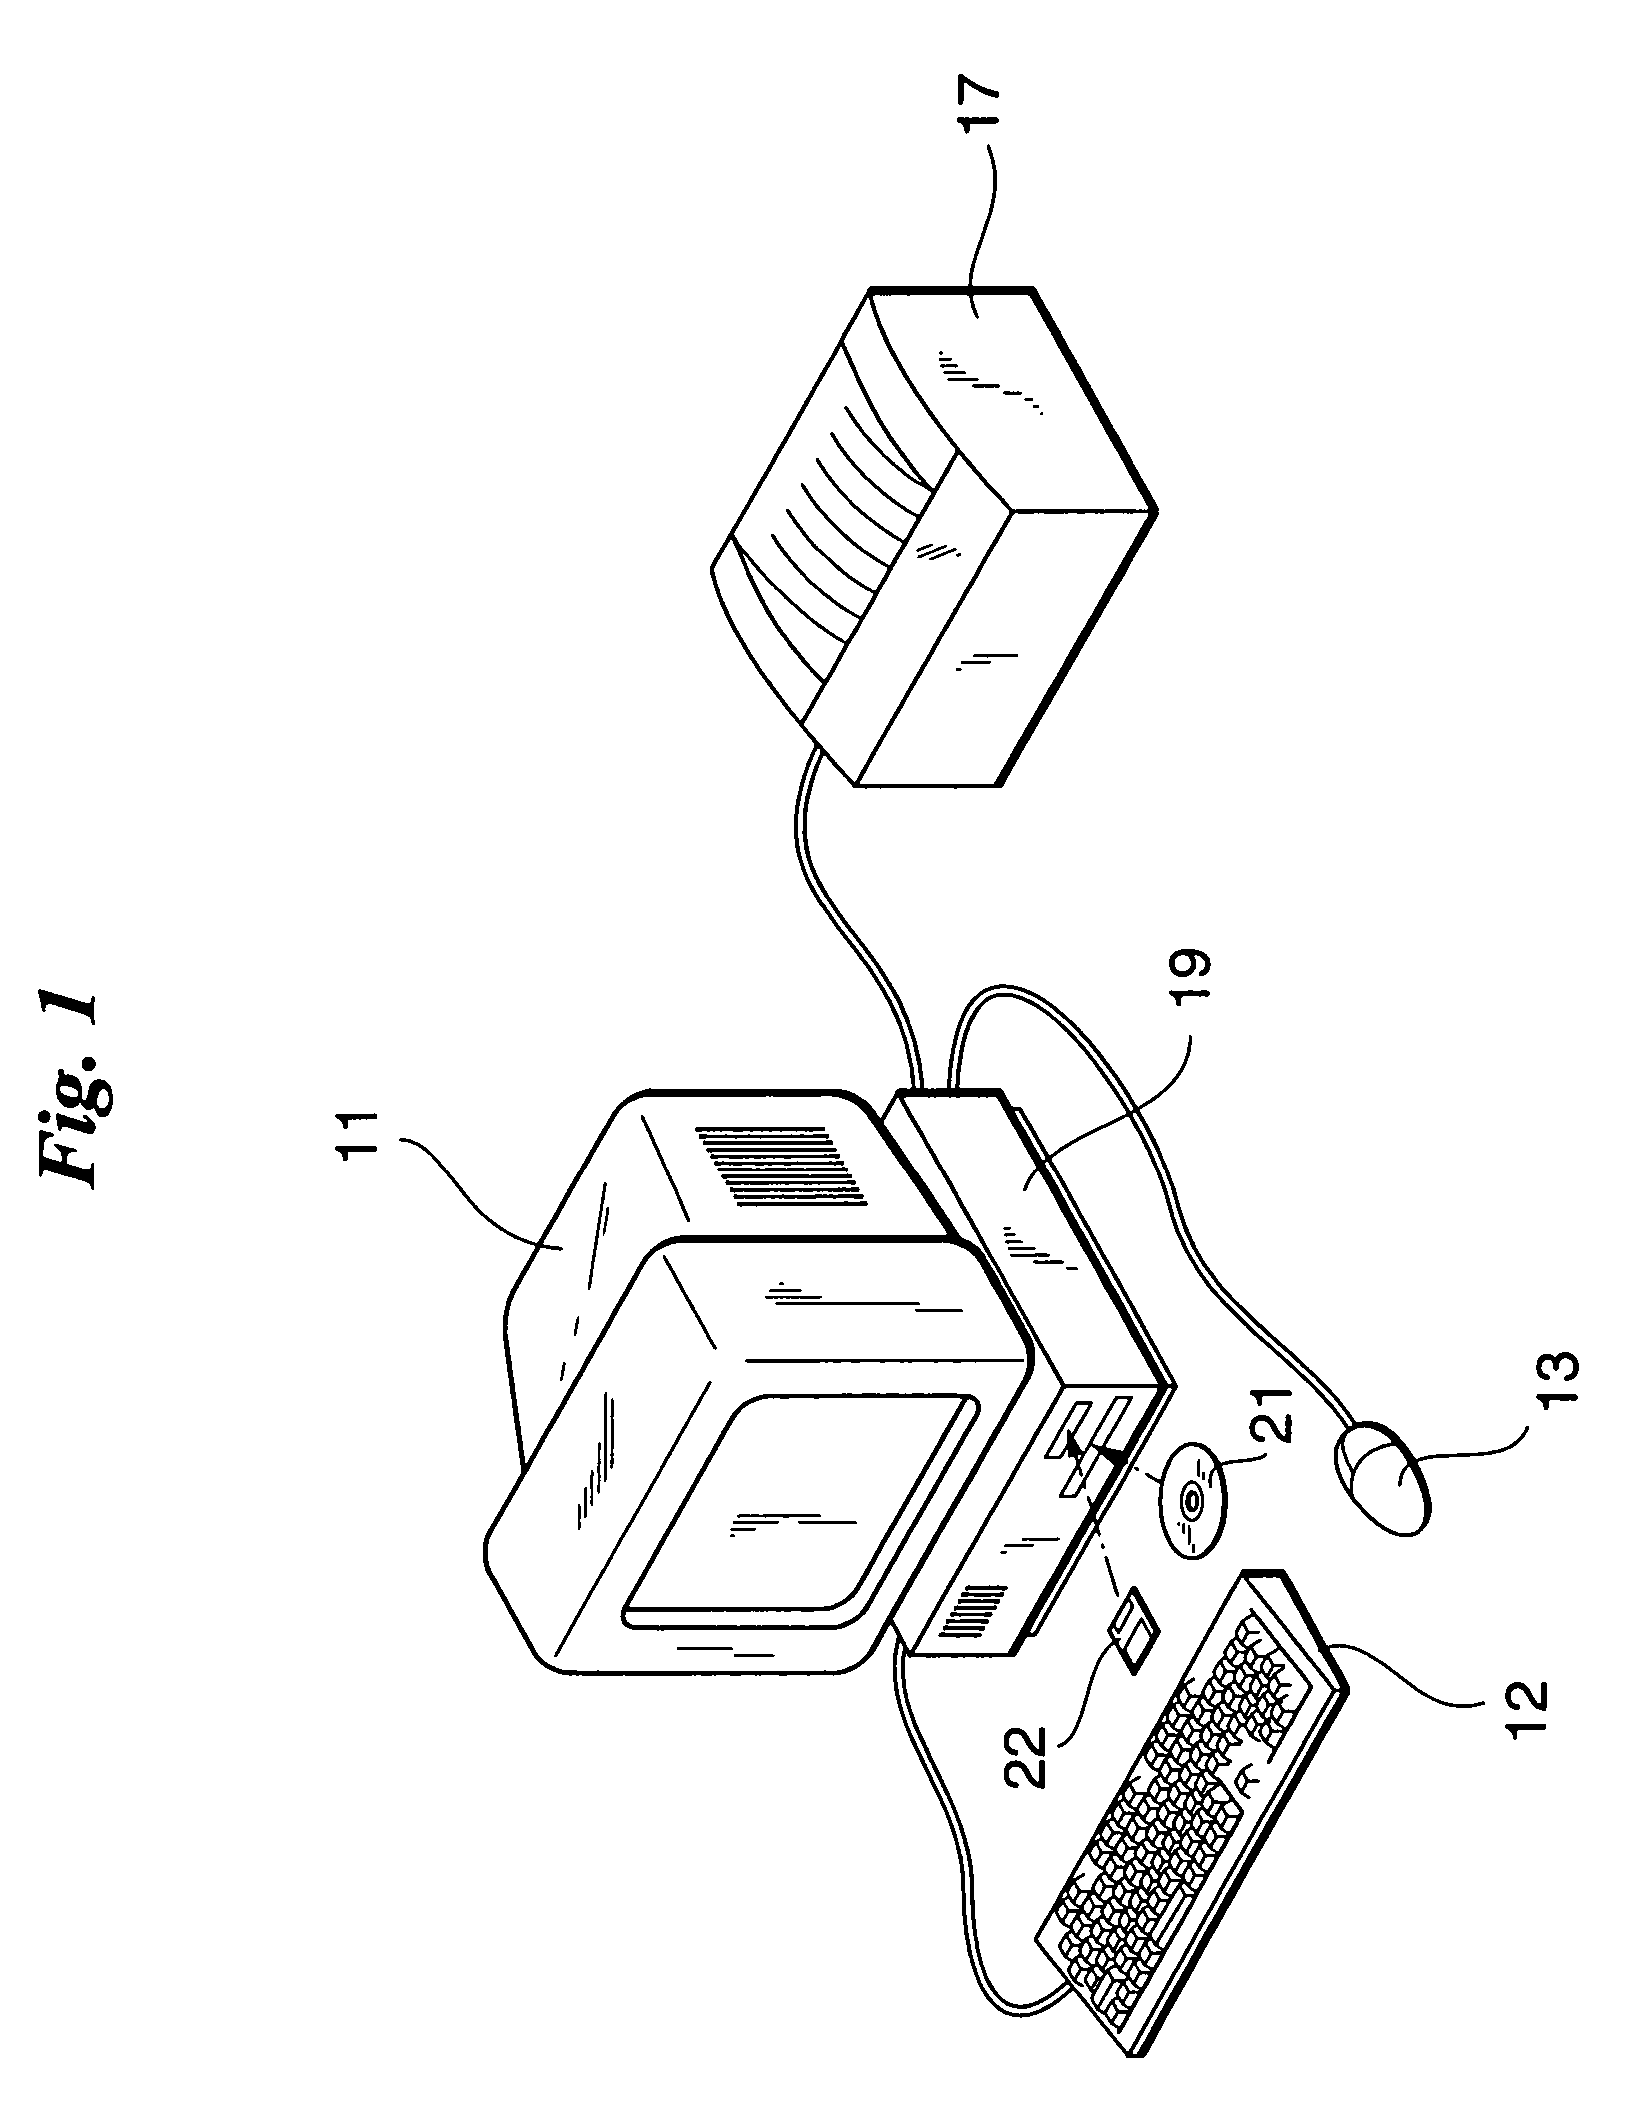 Article design support system and method of controlling same